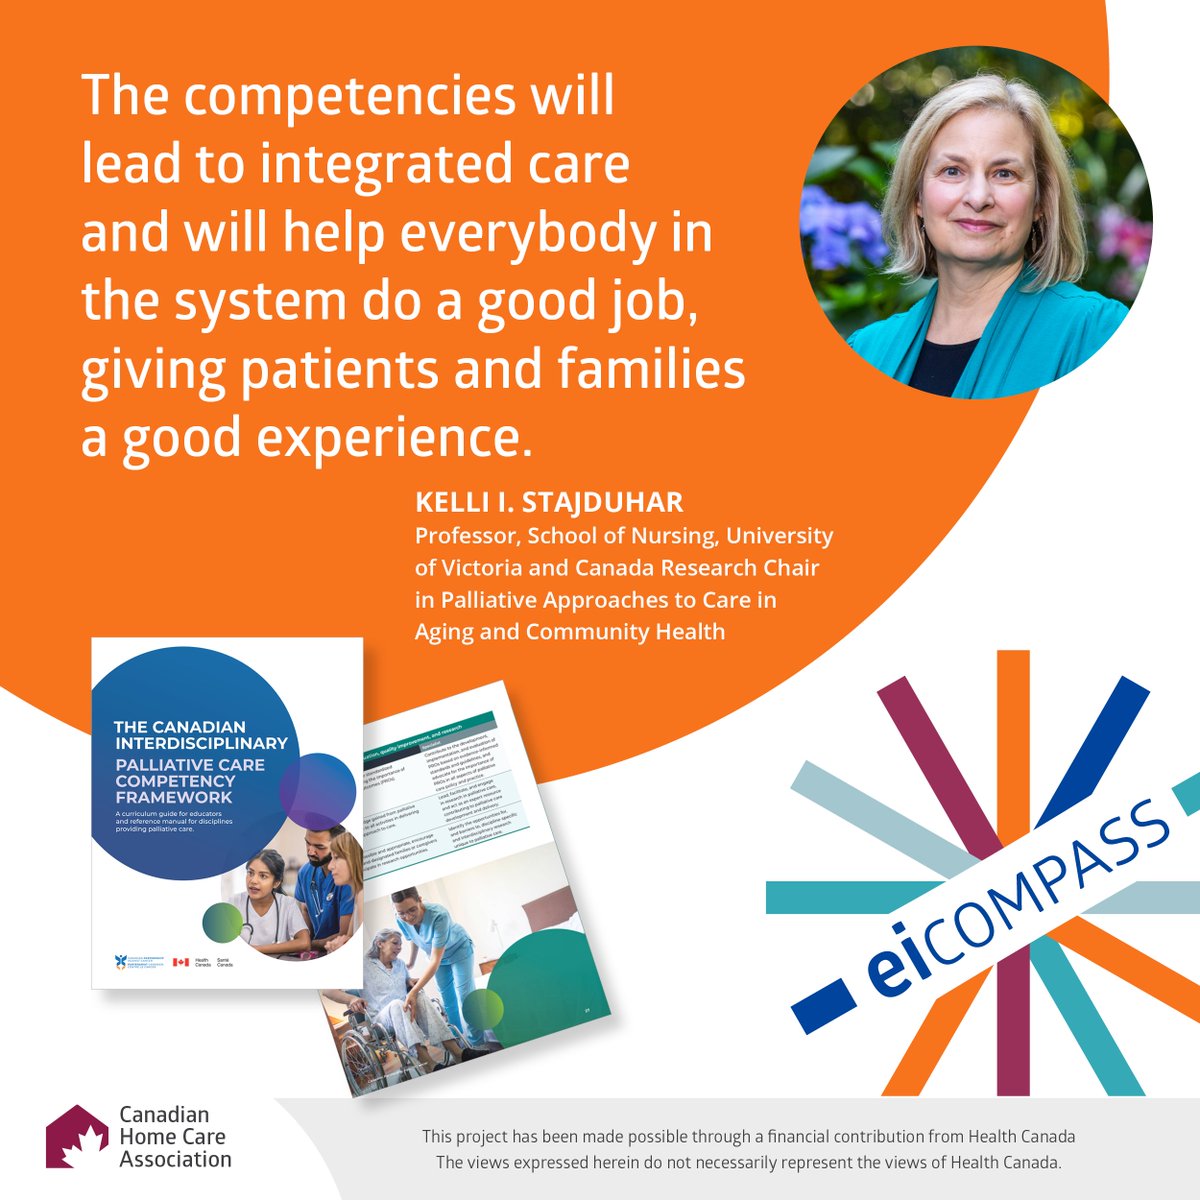 'Integrated care is the future.' says Kelli Stajduhar. The Canadian Interdisciplinary Palliative Care Competency Framework ensures patients and families receive the best possible experience. Read more palliative care experts’ views: cdnhomecare.ca/eicompass/#exp…